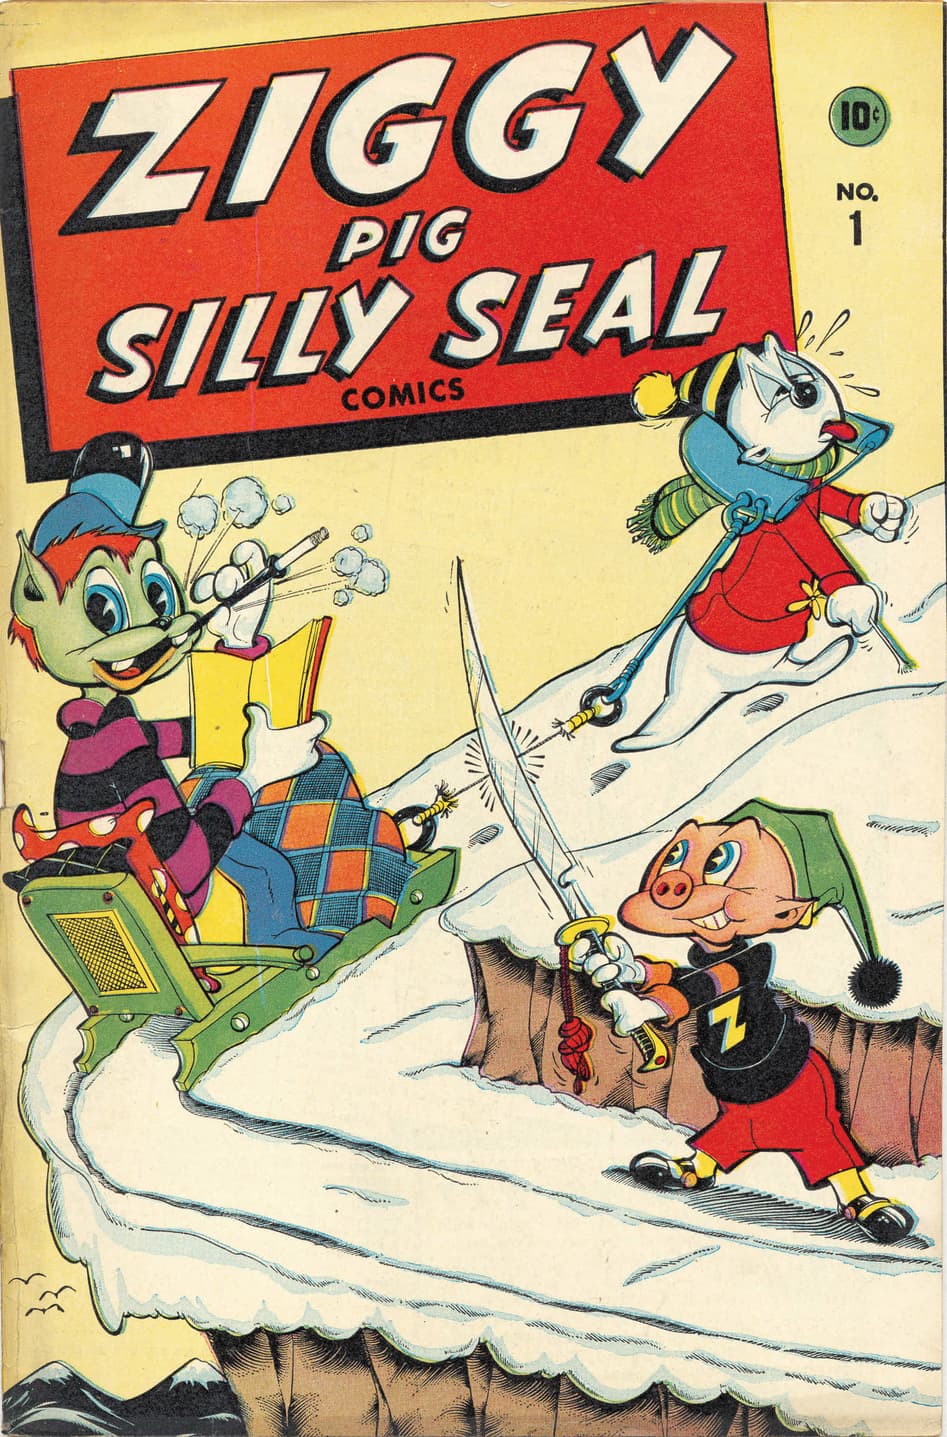 Cover of original Ziggy Pig and Silly Seal